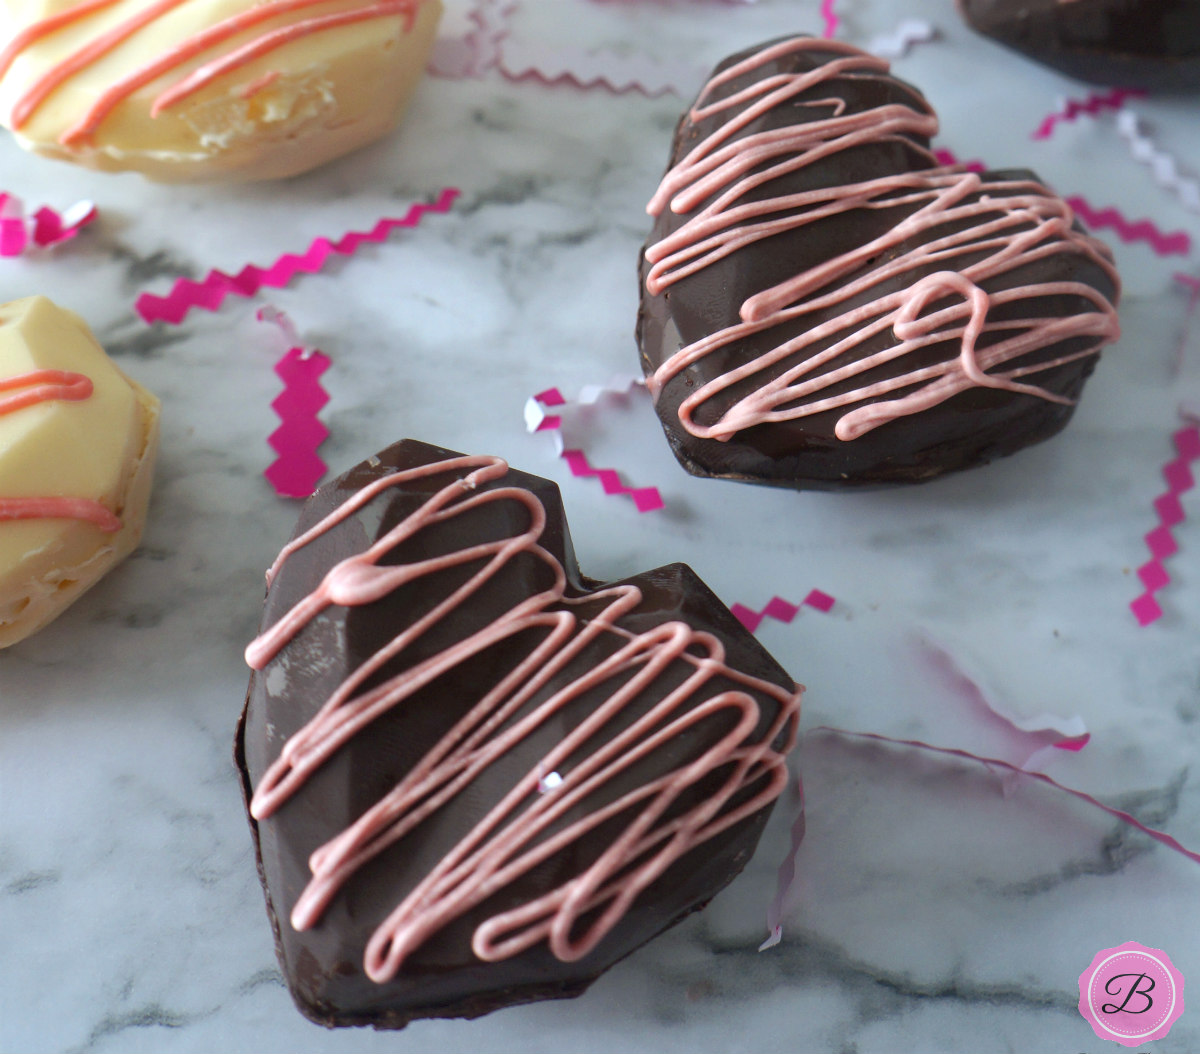 White Chocolate and Heart Hot Chocolate Bombs with Pink Icing on Top